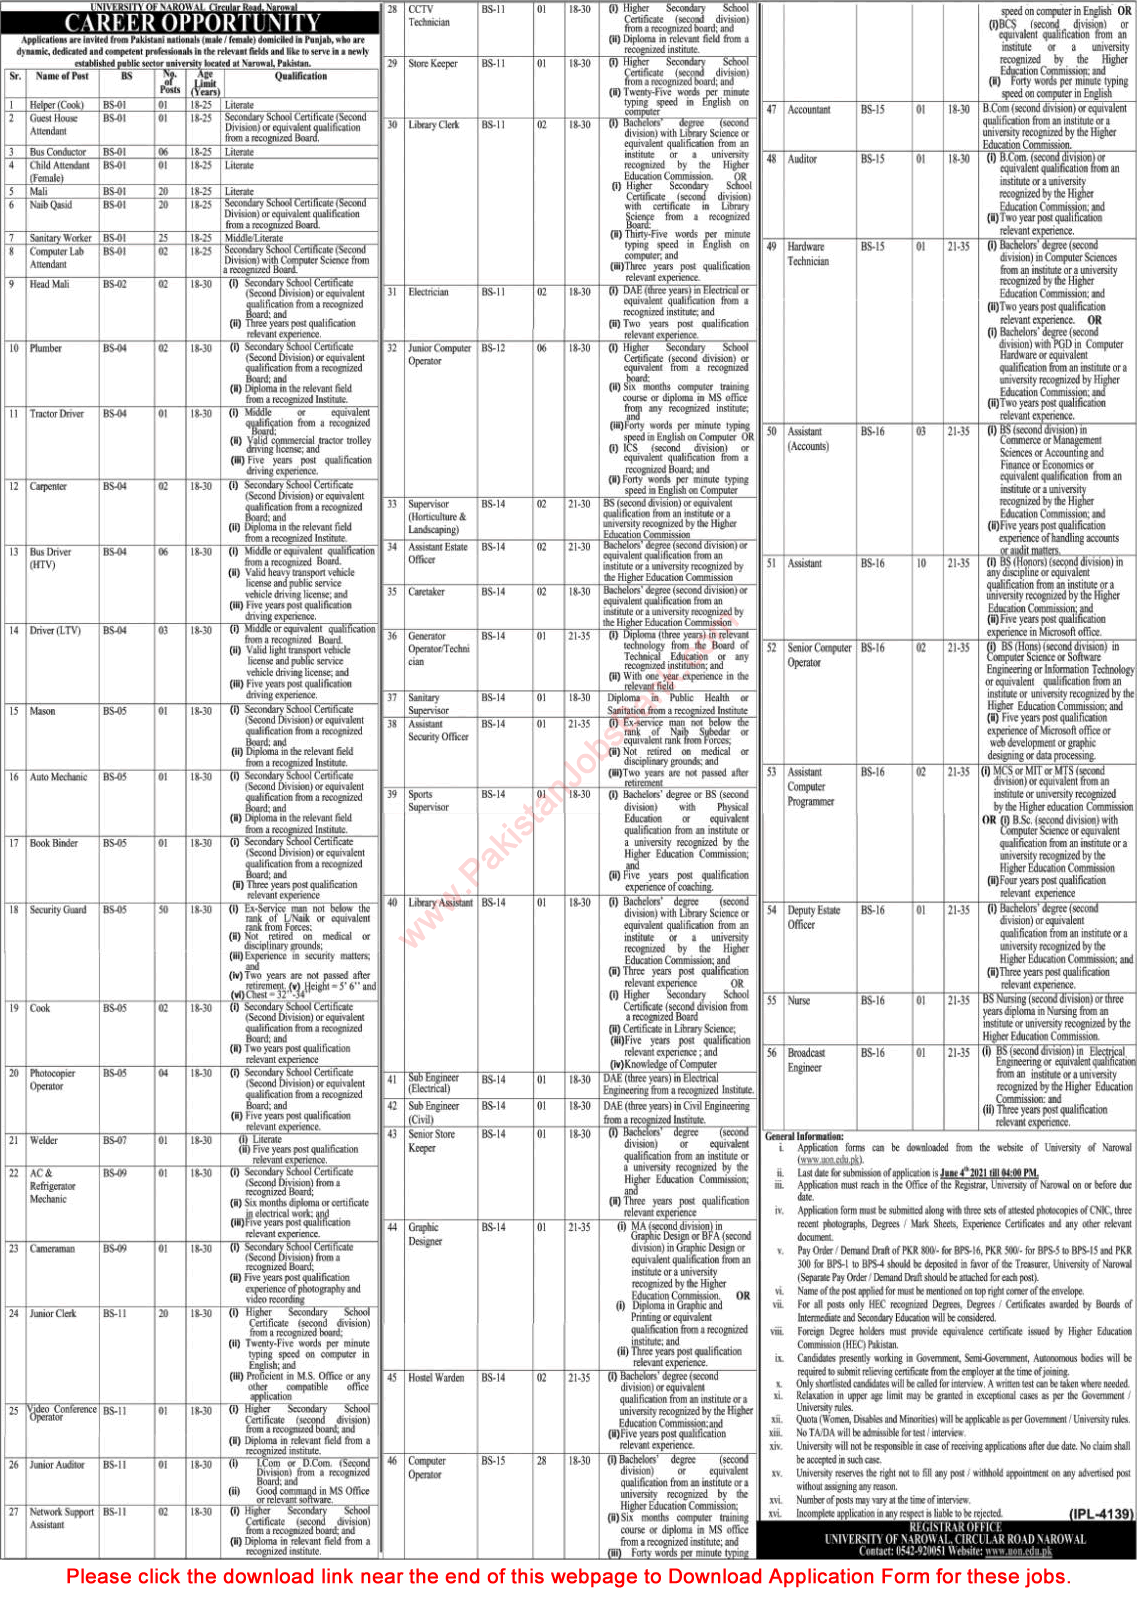 University of Narowal Jobs May 2021 Application Form Security Guards, Computer Operators & Others Latest